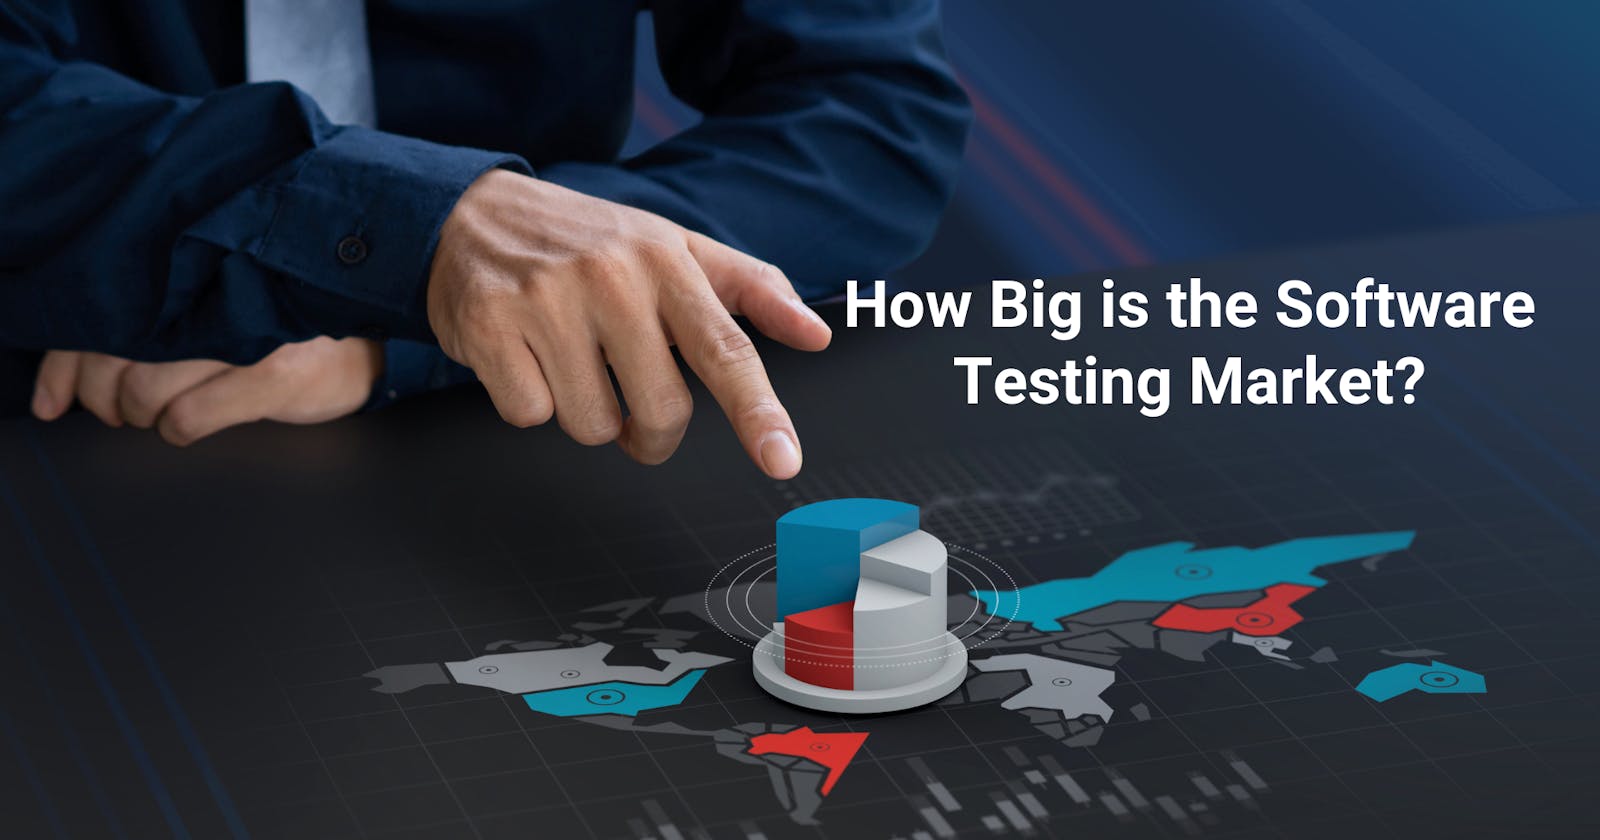 How Big is Software Testing Market?